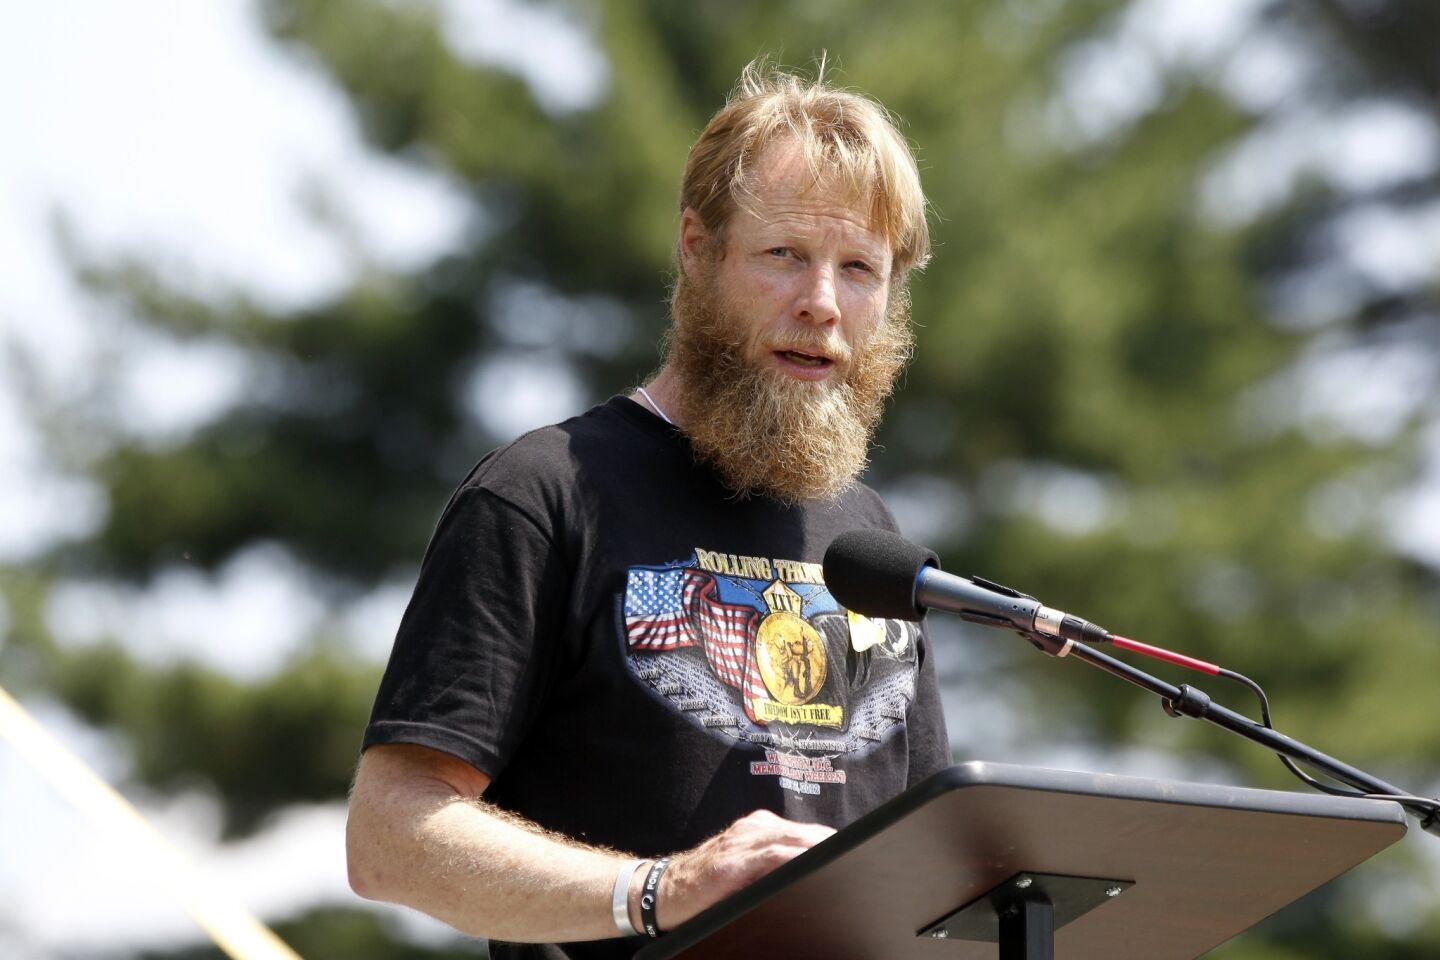 Bob Bergdahl, father of then captive Sgt. Bowe Bergdahl, speaks at the annual Rolling Thunder rally for POW/MIA awareness in 2012.